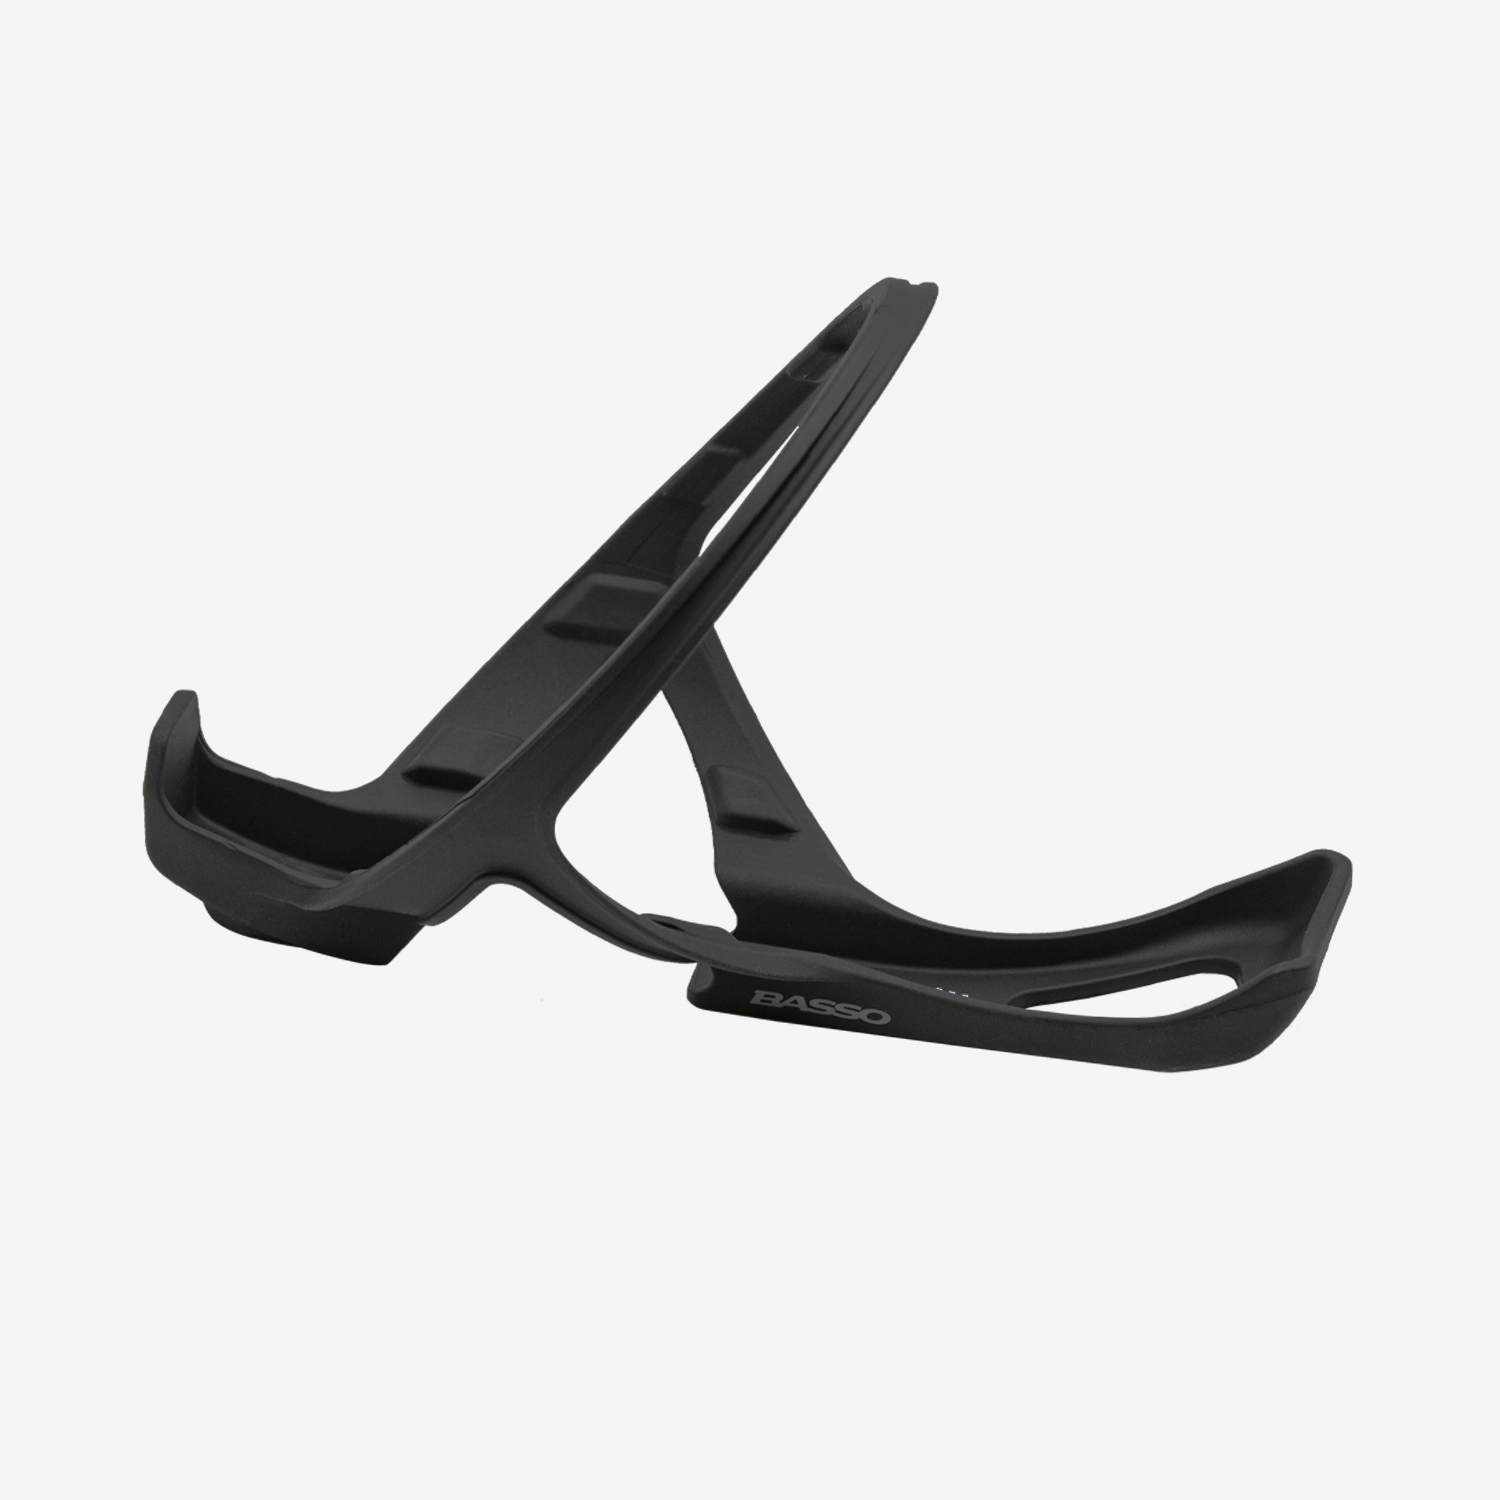 Praxis Carbon Bottle Cage - with magnet